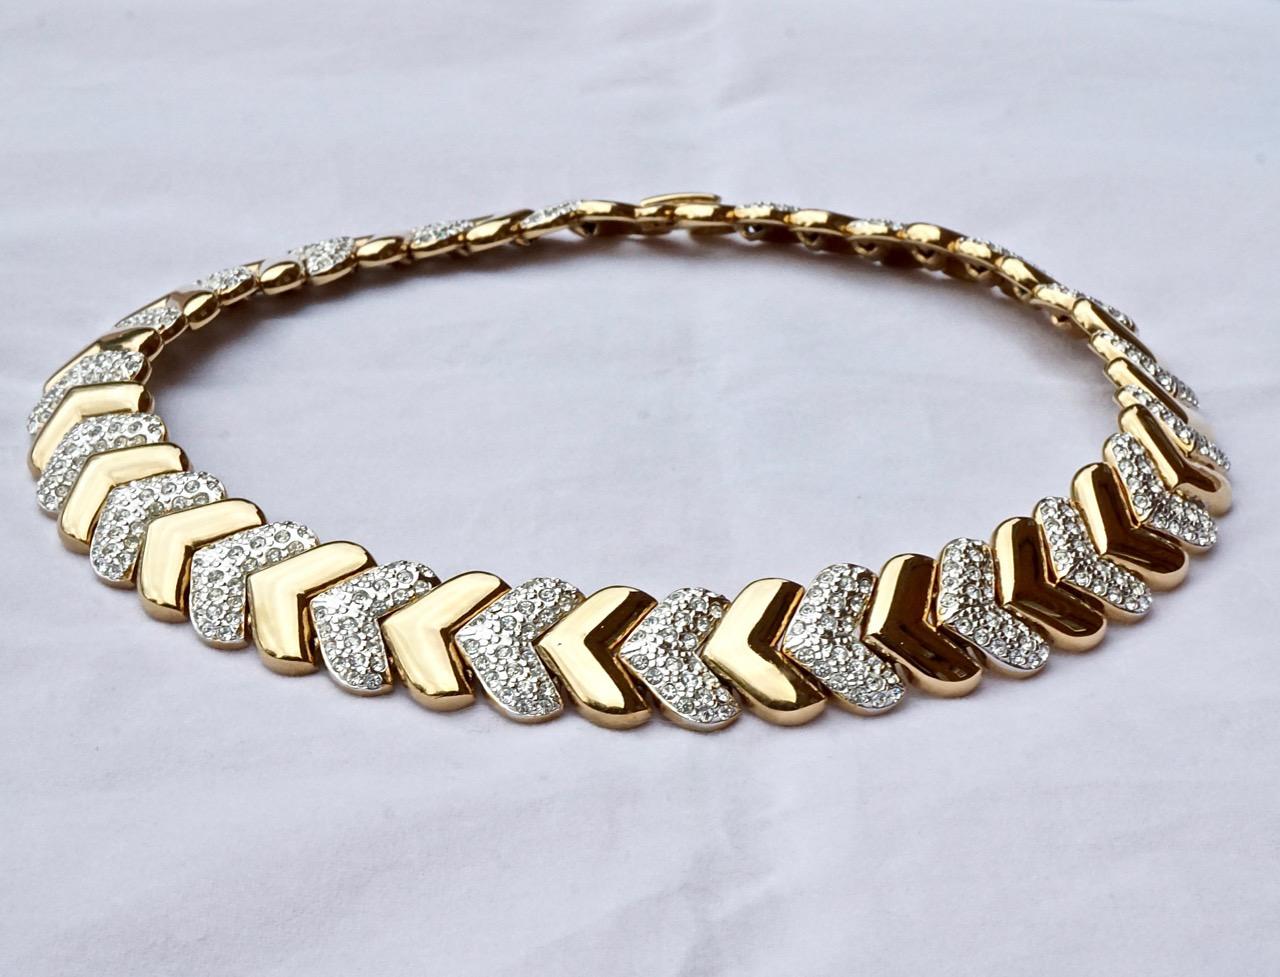 Fabulous gold plated heavy chevron necklace, featuring alternating shiny gold plated and silver plated rhinestone set links. It is made to curve beautifully around the neck. Measuring length 42.5cm / 16.7 inches by width 1.8cm / .7 inch. The